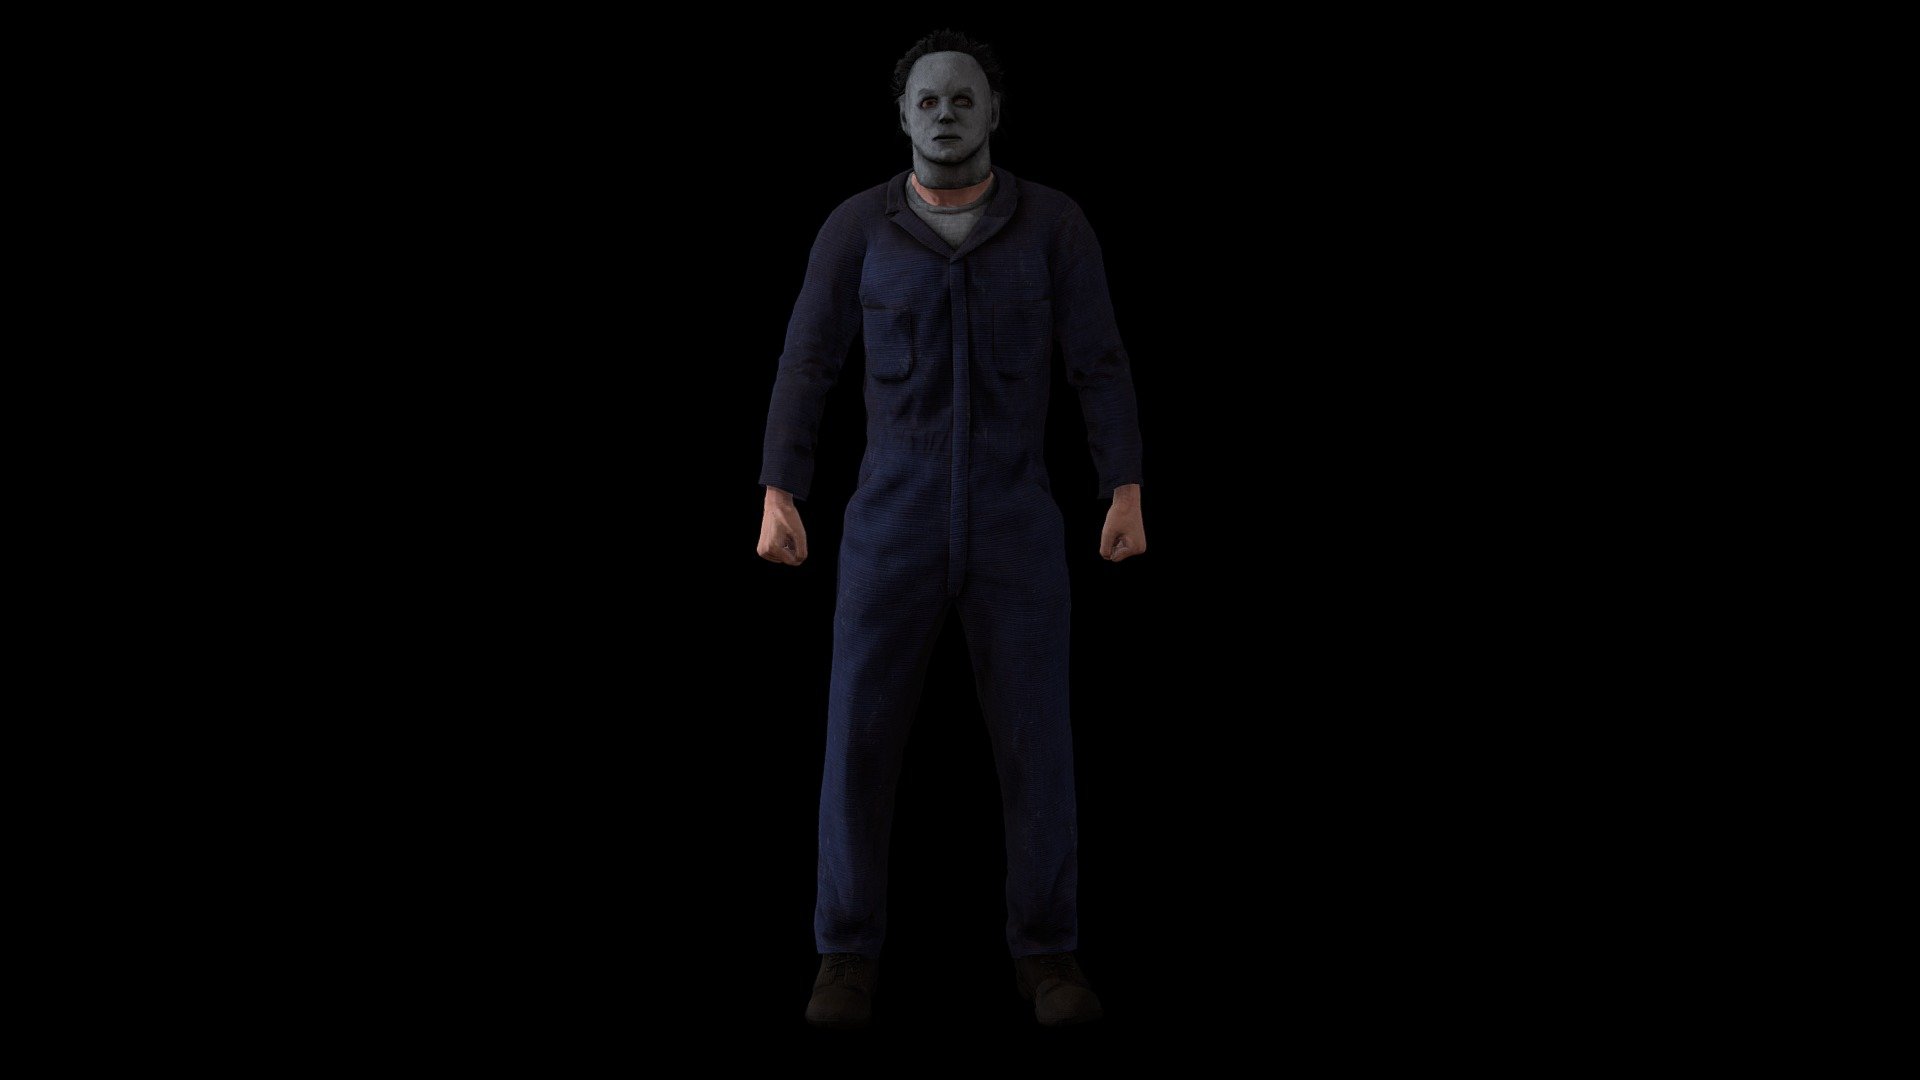 Michael Myers (Halloween Movie):
Complete archive in additional file.

Character in A-pose ( Game Version).




High details.

Highres unique textures.

Rigged.

Exported to Unreal ( migrate files). Use same standard unreal mannequin skeleton. Can handle the same animations as Unreal mannequin from marketplace.

Highres Texturesets.

Professional Uv Layout.

Character mesh.

3d Game Ready Samurai Warrior Character.

High detail and realistic model.

Rigged, with high definition textures.

Texture types:




Albedo (Diffuse).

Normal.

Roughness.

Metallness.

ORM(Unreal Engine).
 - Michael Myers(Halloween) Character PBR - Buy Royalty Free 3D model by lidiom4ri4 3d model